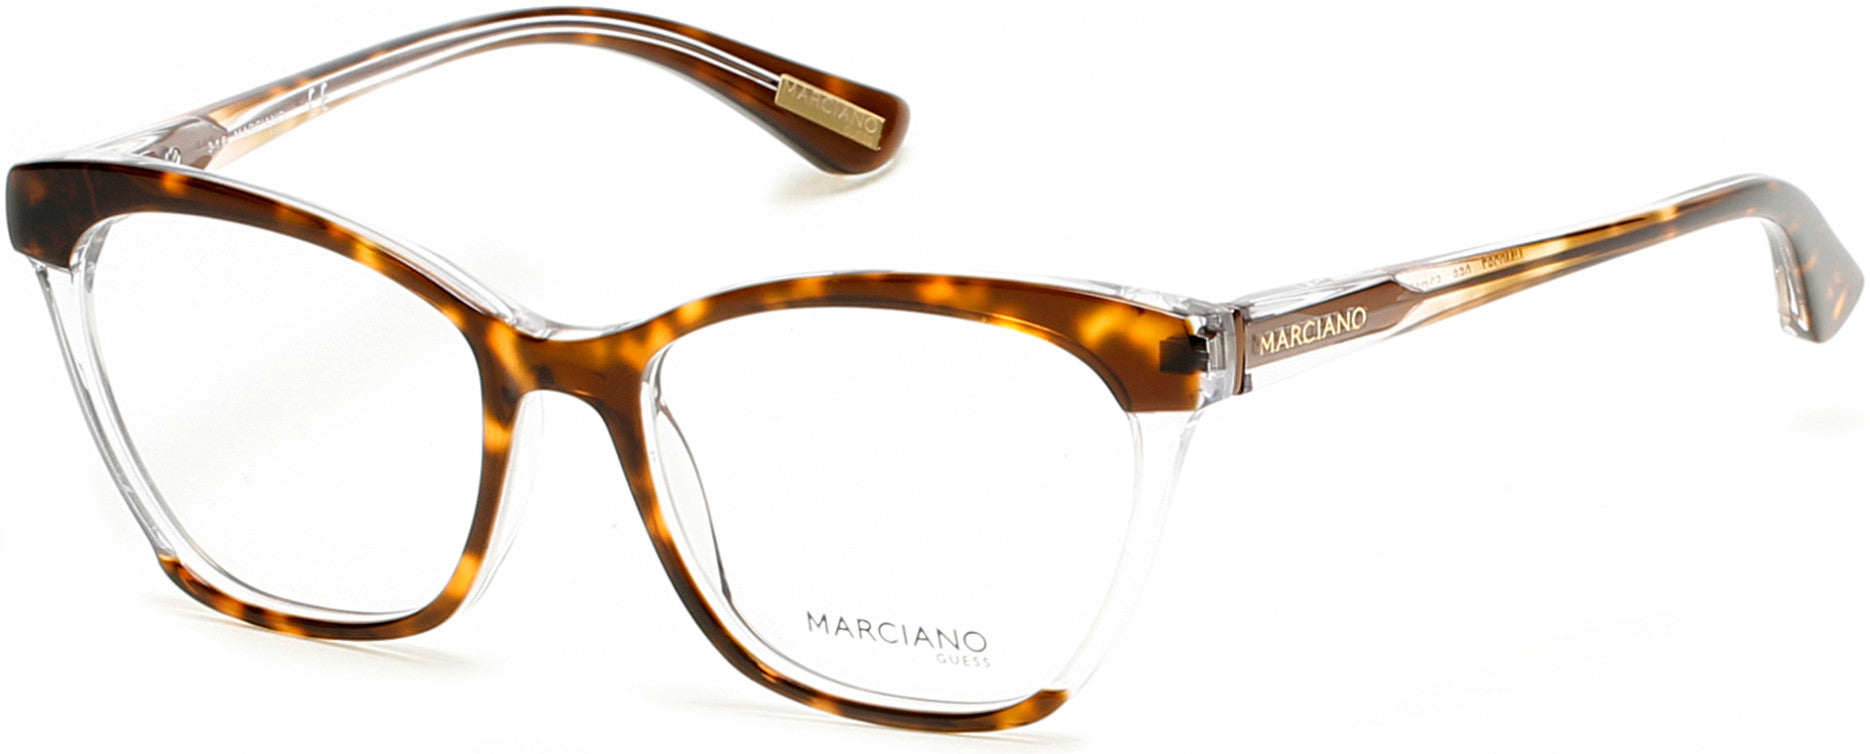 Guess By Marciano GM0287 Cat Eyeglasses 056-056 - Havana/other